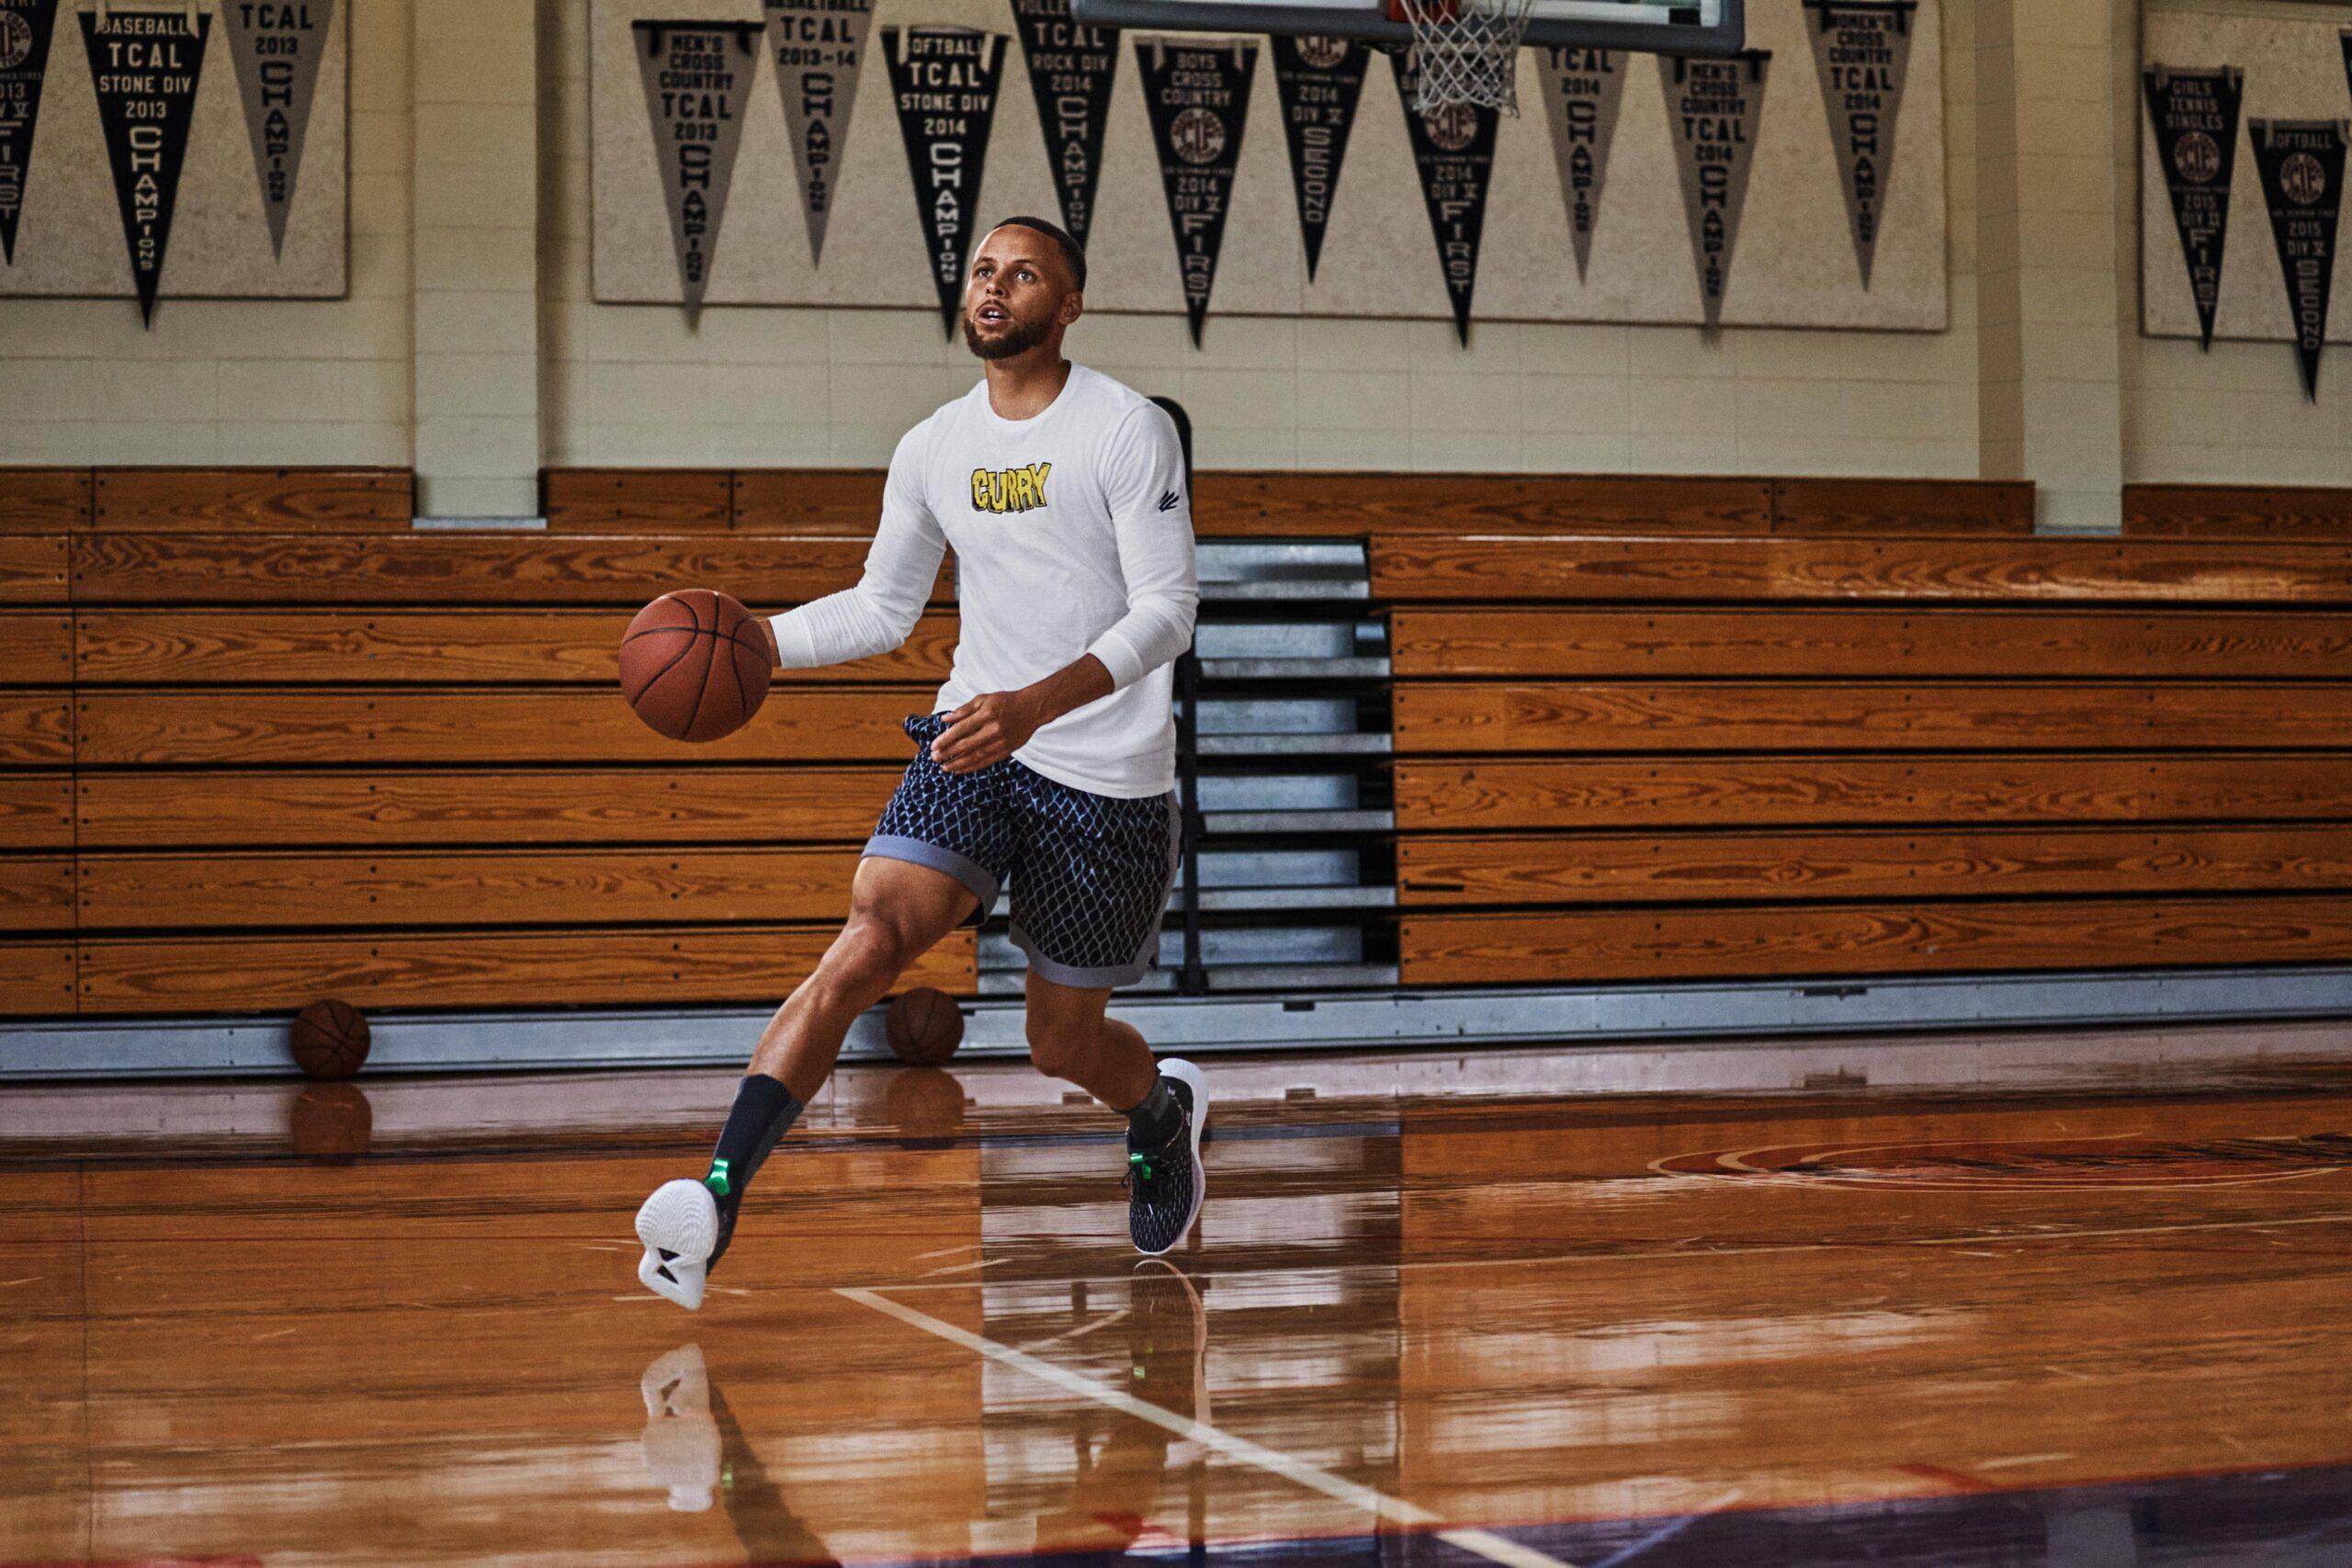 Stephen Curry and Under Armour to drop street pack collection with Sesame Street